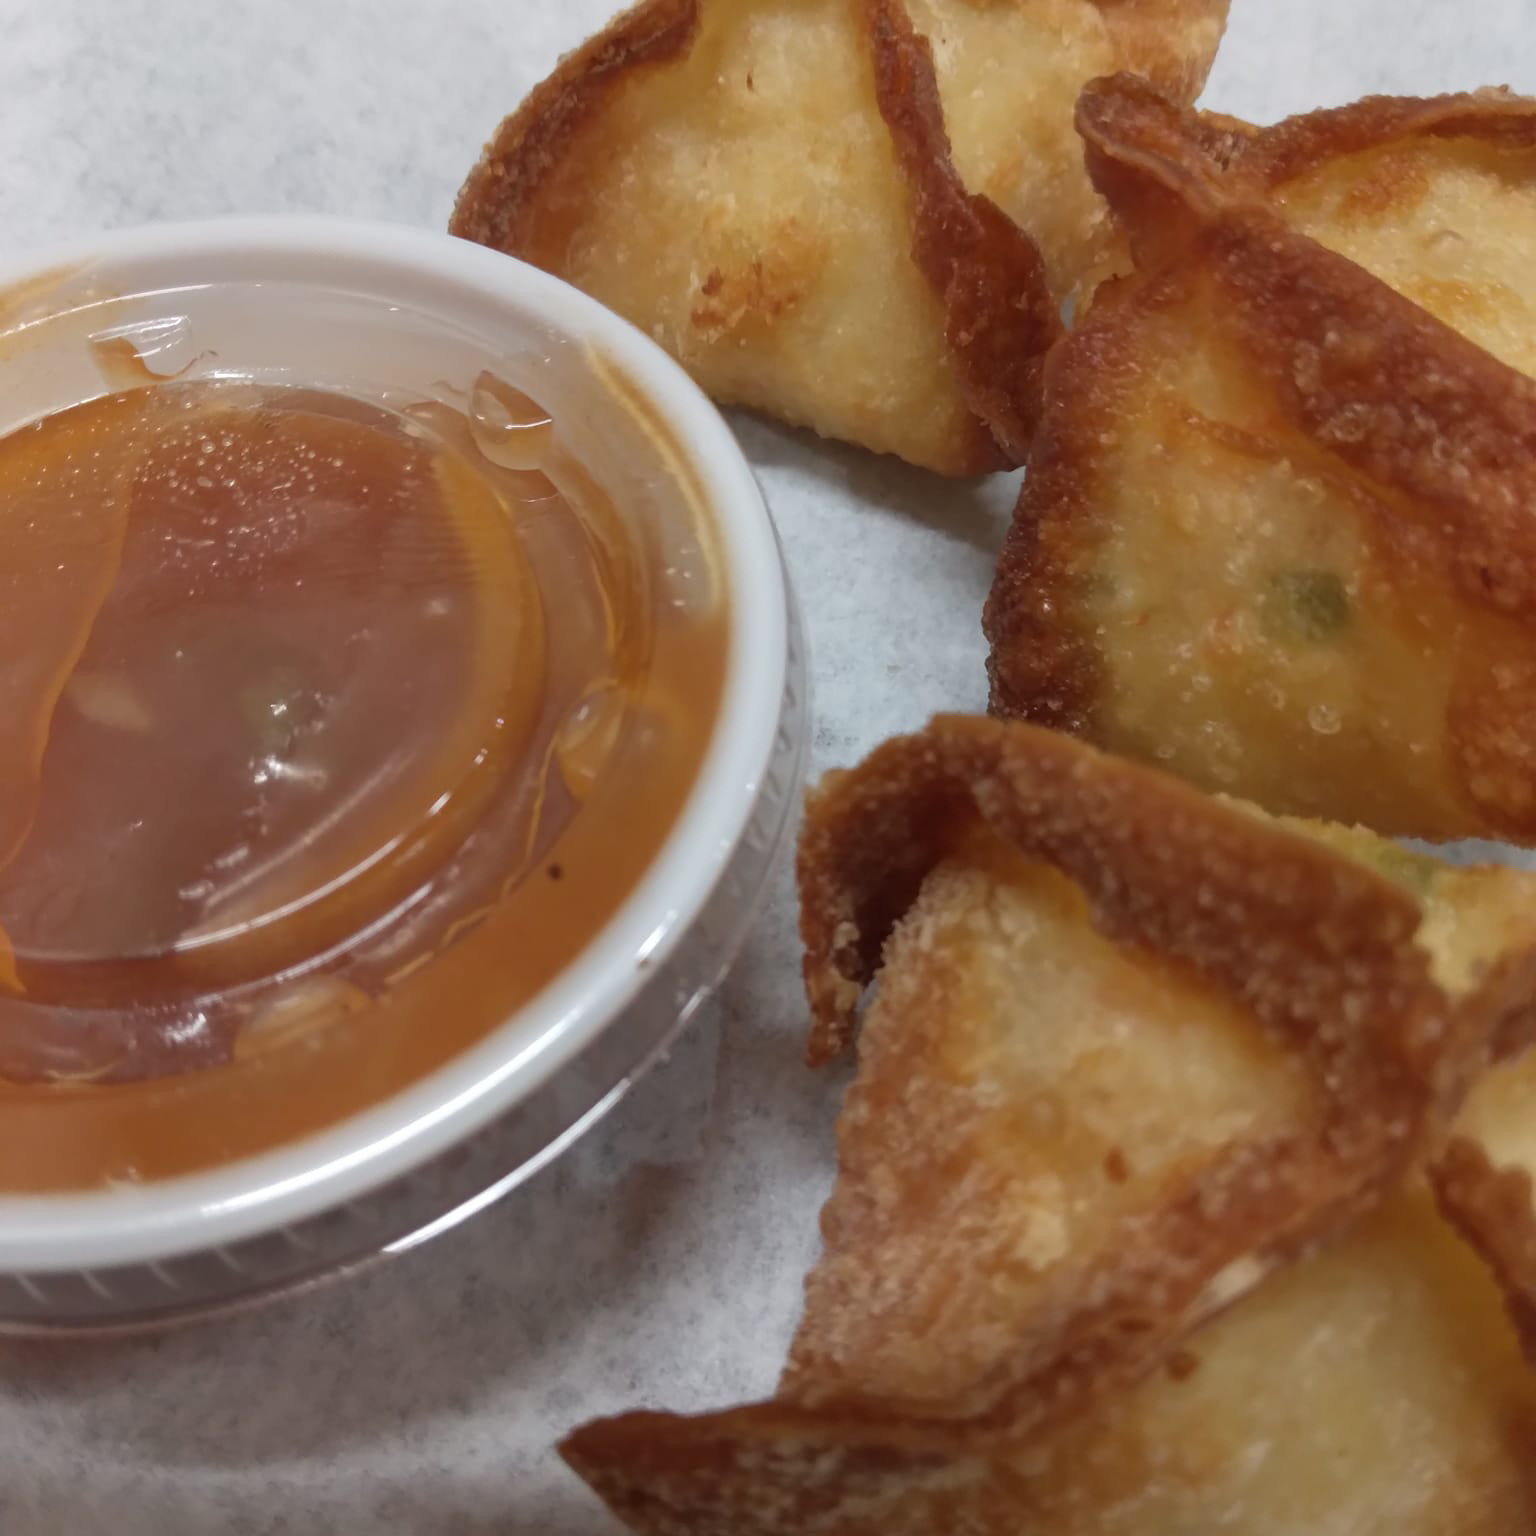 Fried to a golden brown and served with our homemade sweet and sour sauce!